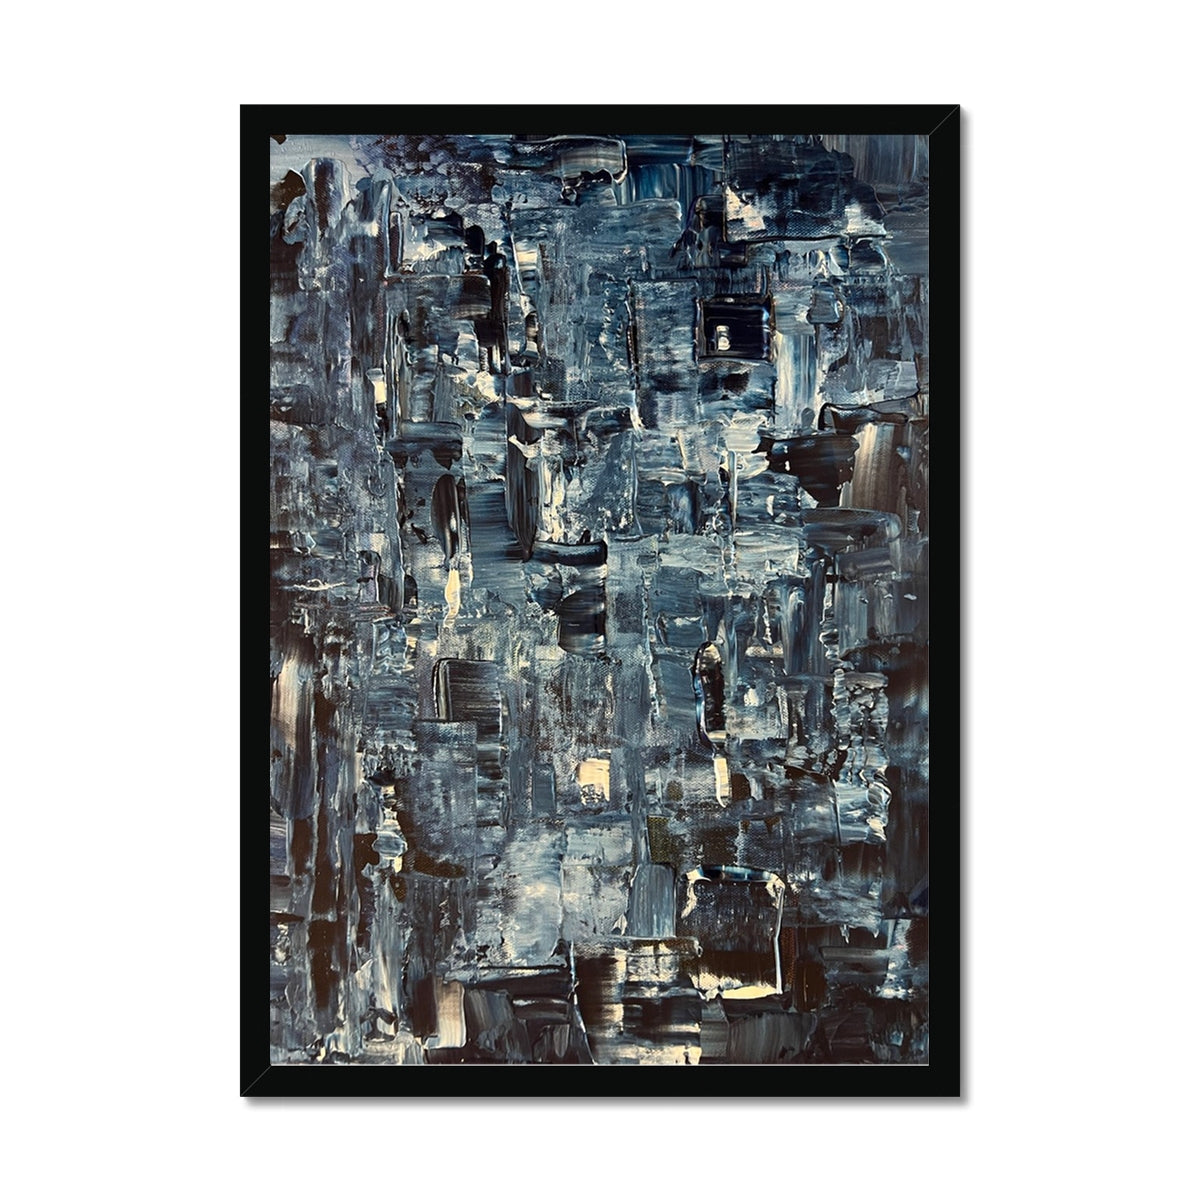 Inception Abstract Painting | Framed Prints From Scotland-Framed Prints-Abstract & Impressionistic Art Gallery-A2 Portrait-Black Frame-Paintings, Prints, Homeware, Art Gifts From Scotland By Scottish Artist Kevin Hunter